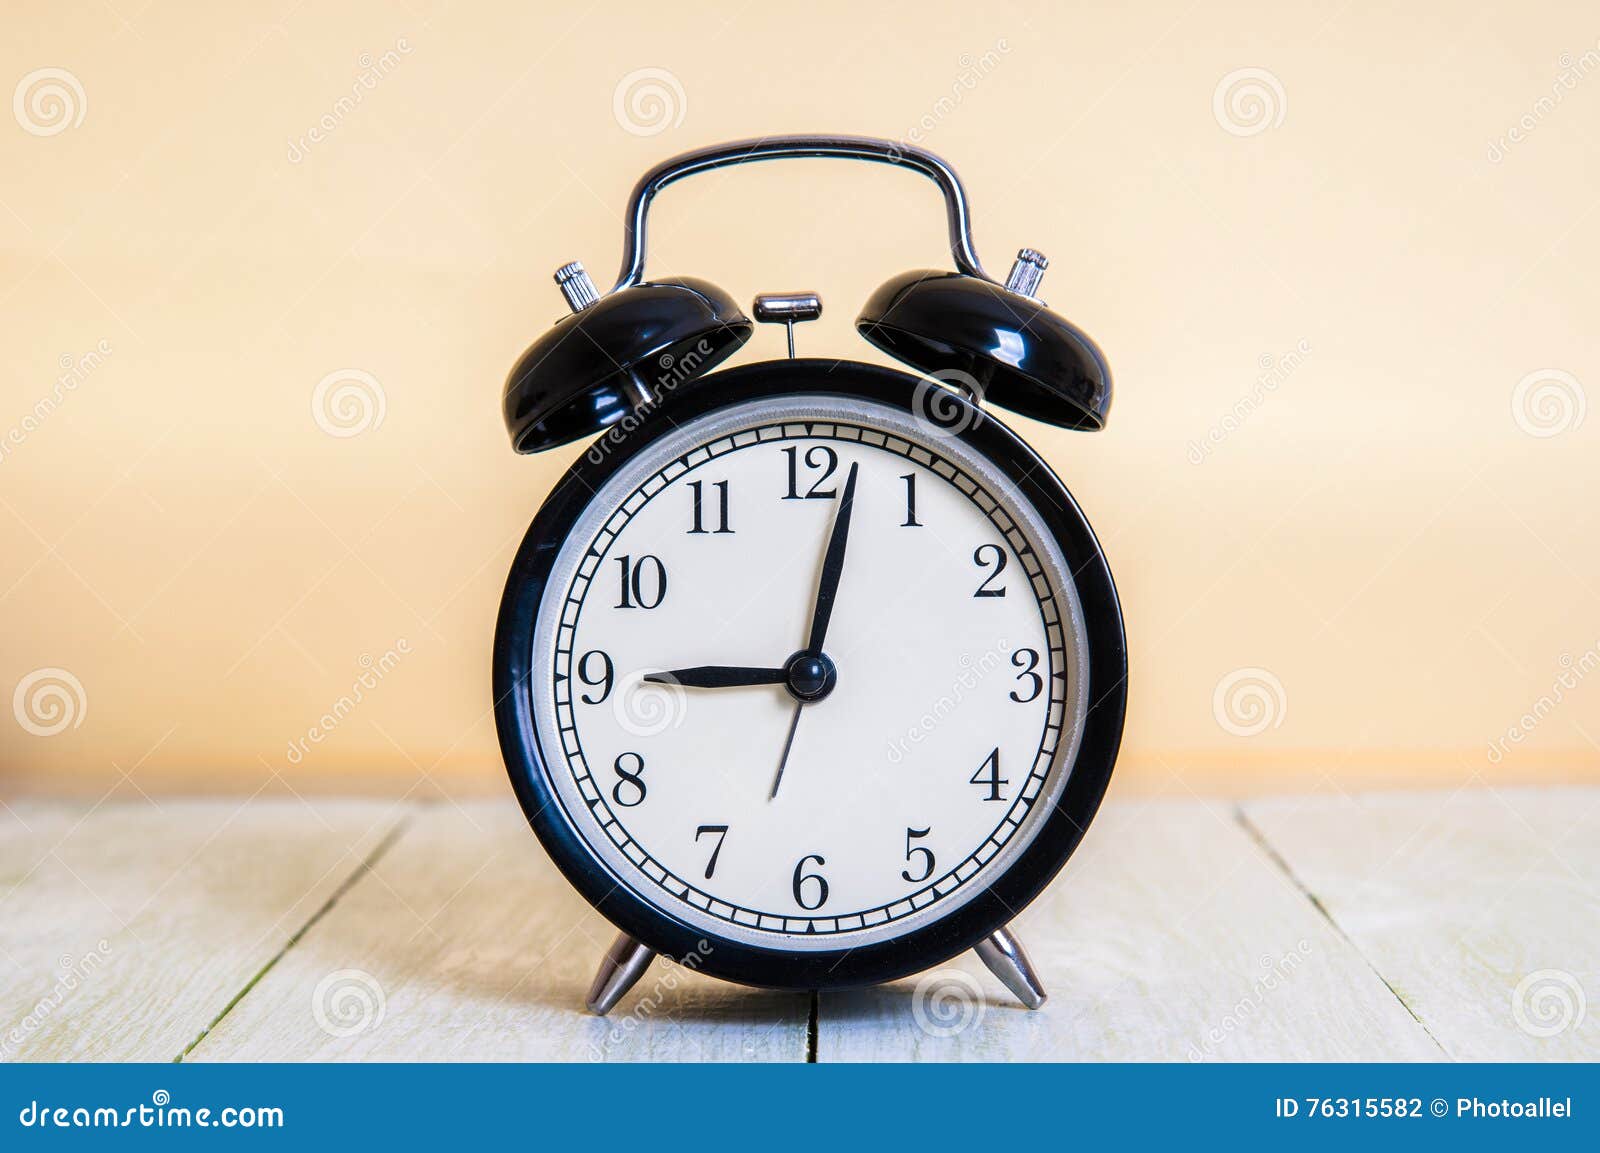 Vintage Background With Retro Alarm Clock 9pm Am On Wooden Table Stock Photo Image Of Countdown Place